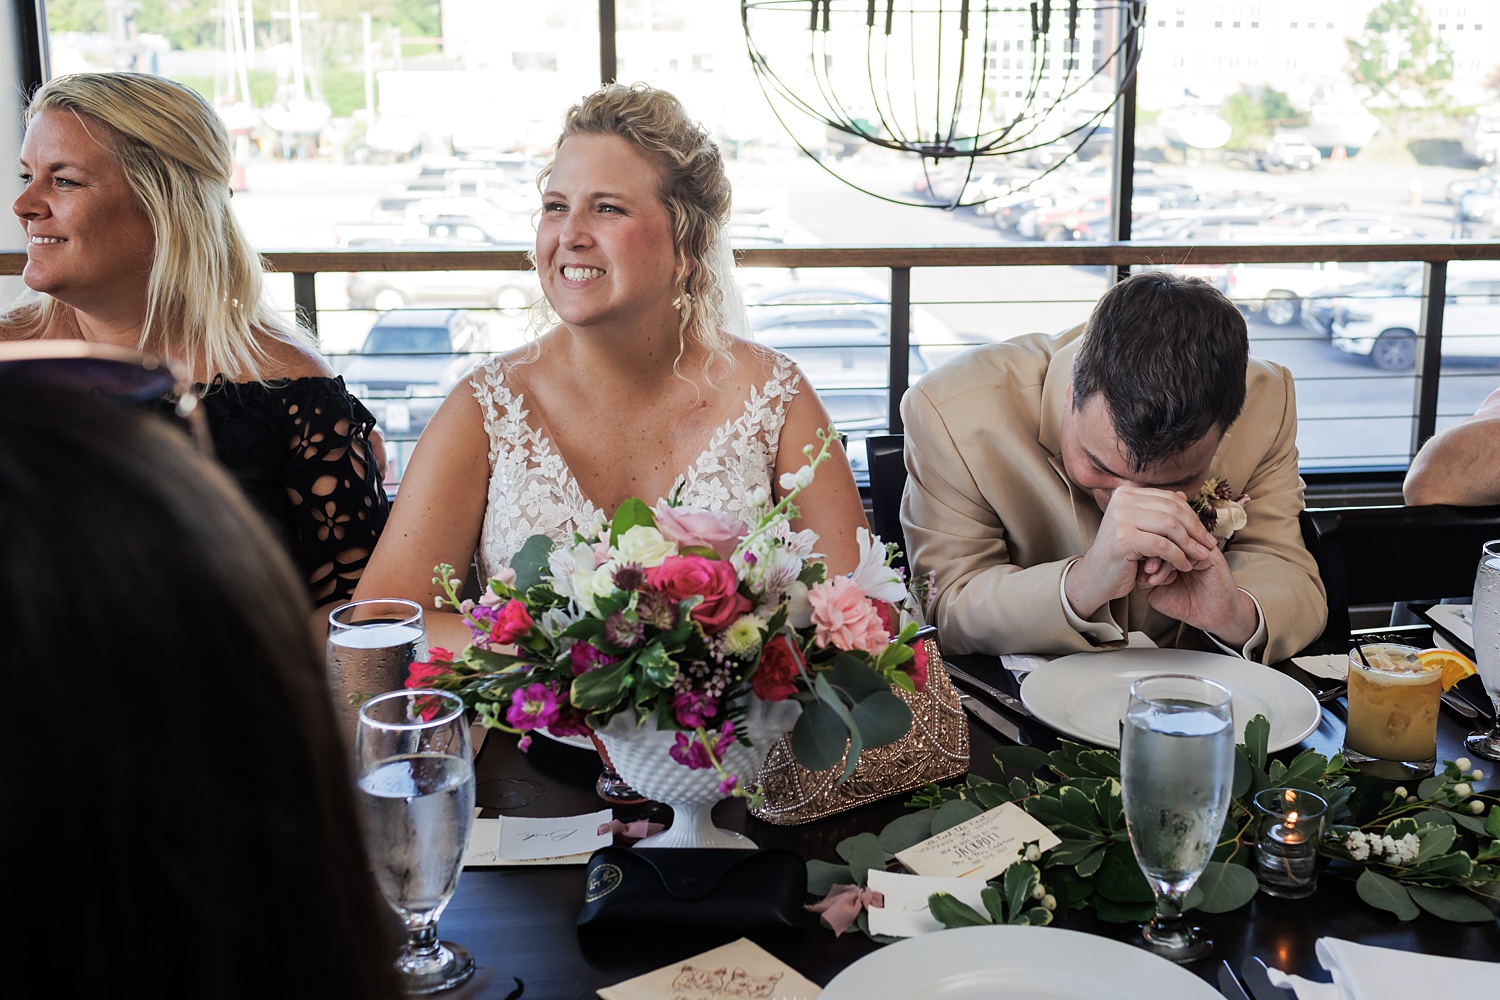 Laughter during the wedding day toasts